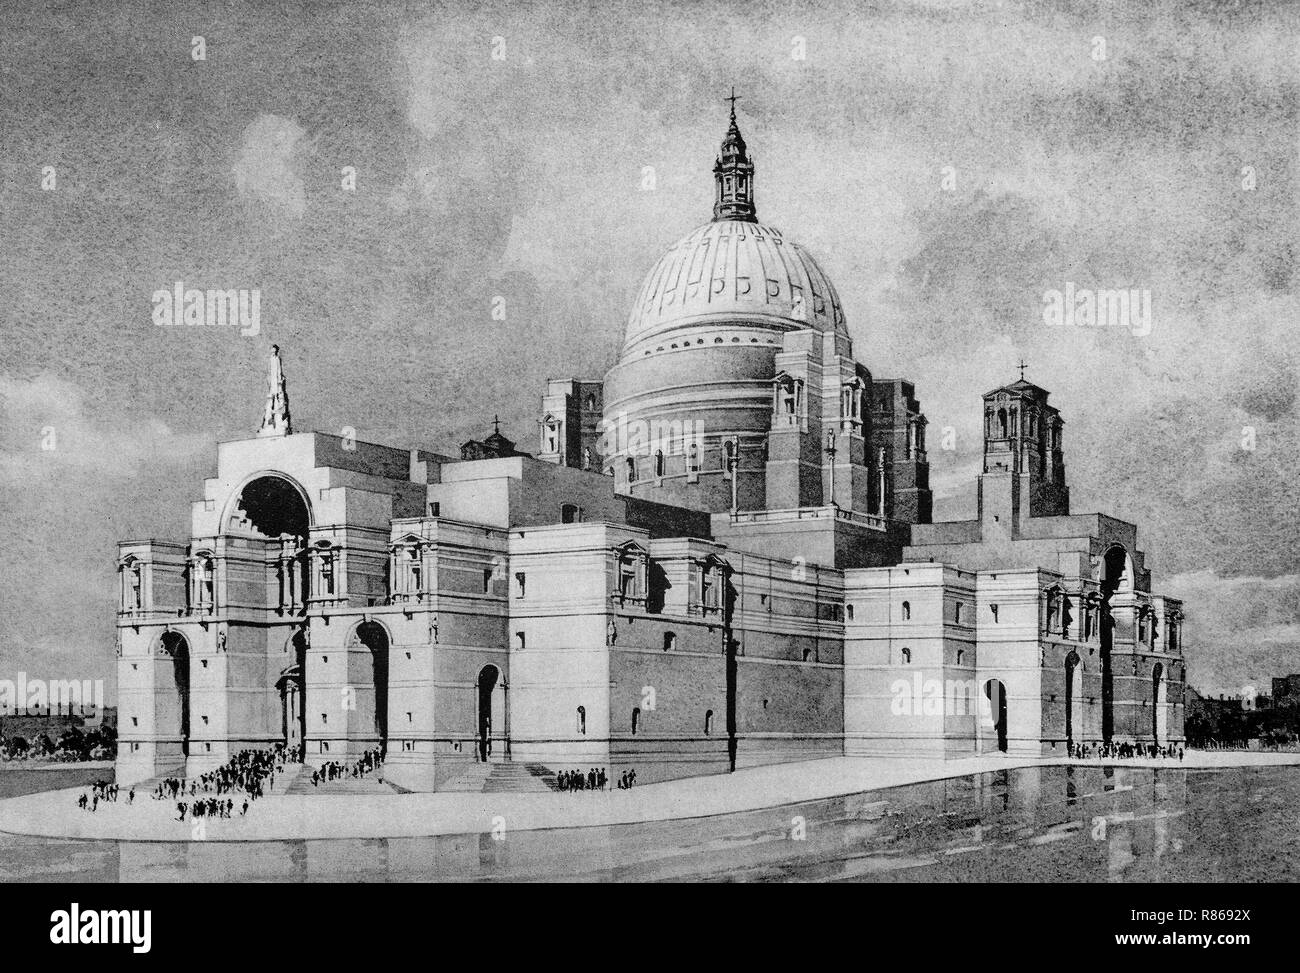 An impression of the design of The Metropolitan (Roman Catholic) Cathedral by Sir Edwin Lutyens (1869–1944).  Lutyens' design was intended to create a massive structure that would have become the second-largest church in the world. It would have the world's largest dome, with a diameter of 168 feet (51 m). Building work began in 1933, but the restrictions of World War II wartime and rising costs forced construction to stop. In 1956, work recommenced on the crypt, which was finished in 1958. Thereafter, Lutyens' design was considered too costly and was abandoned with only the crypt complete. Stock Photo